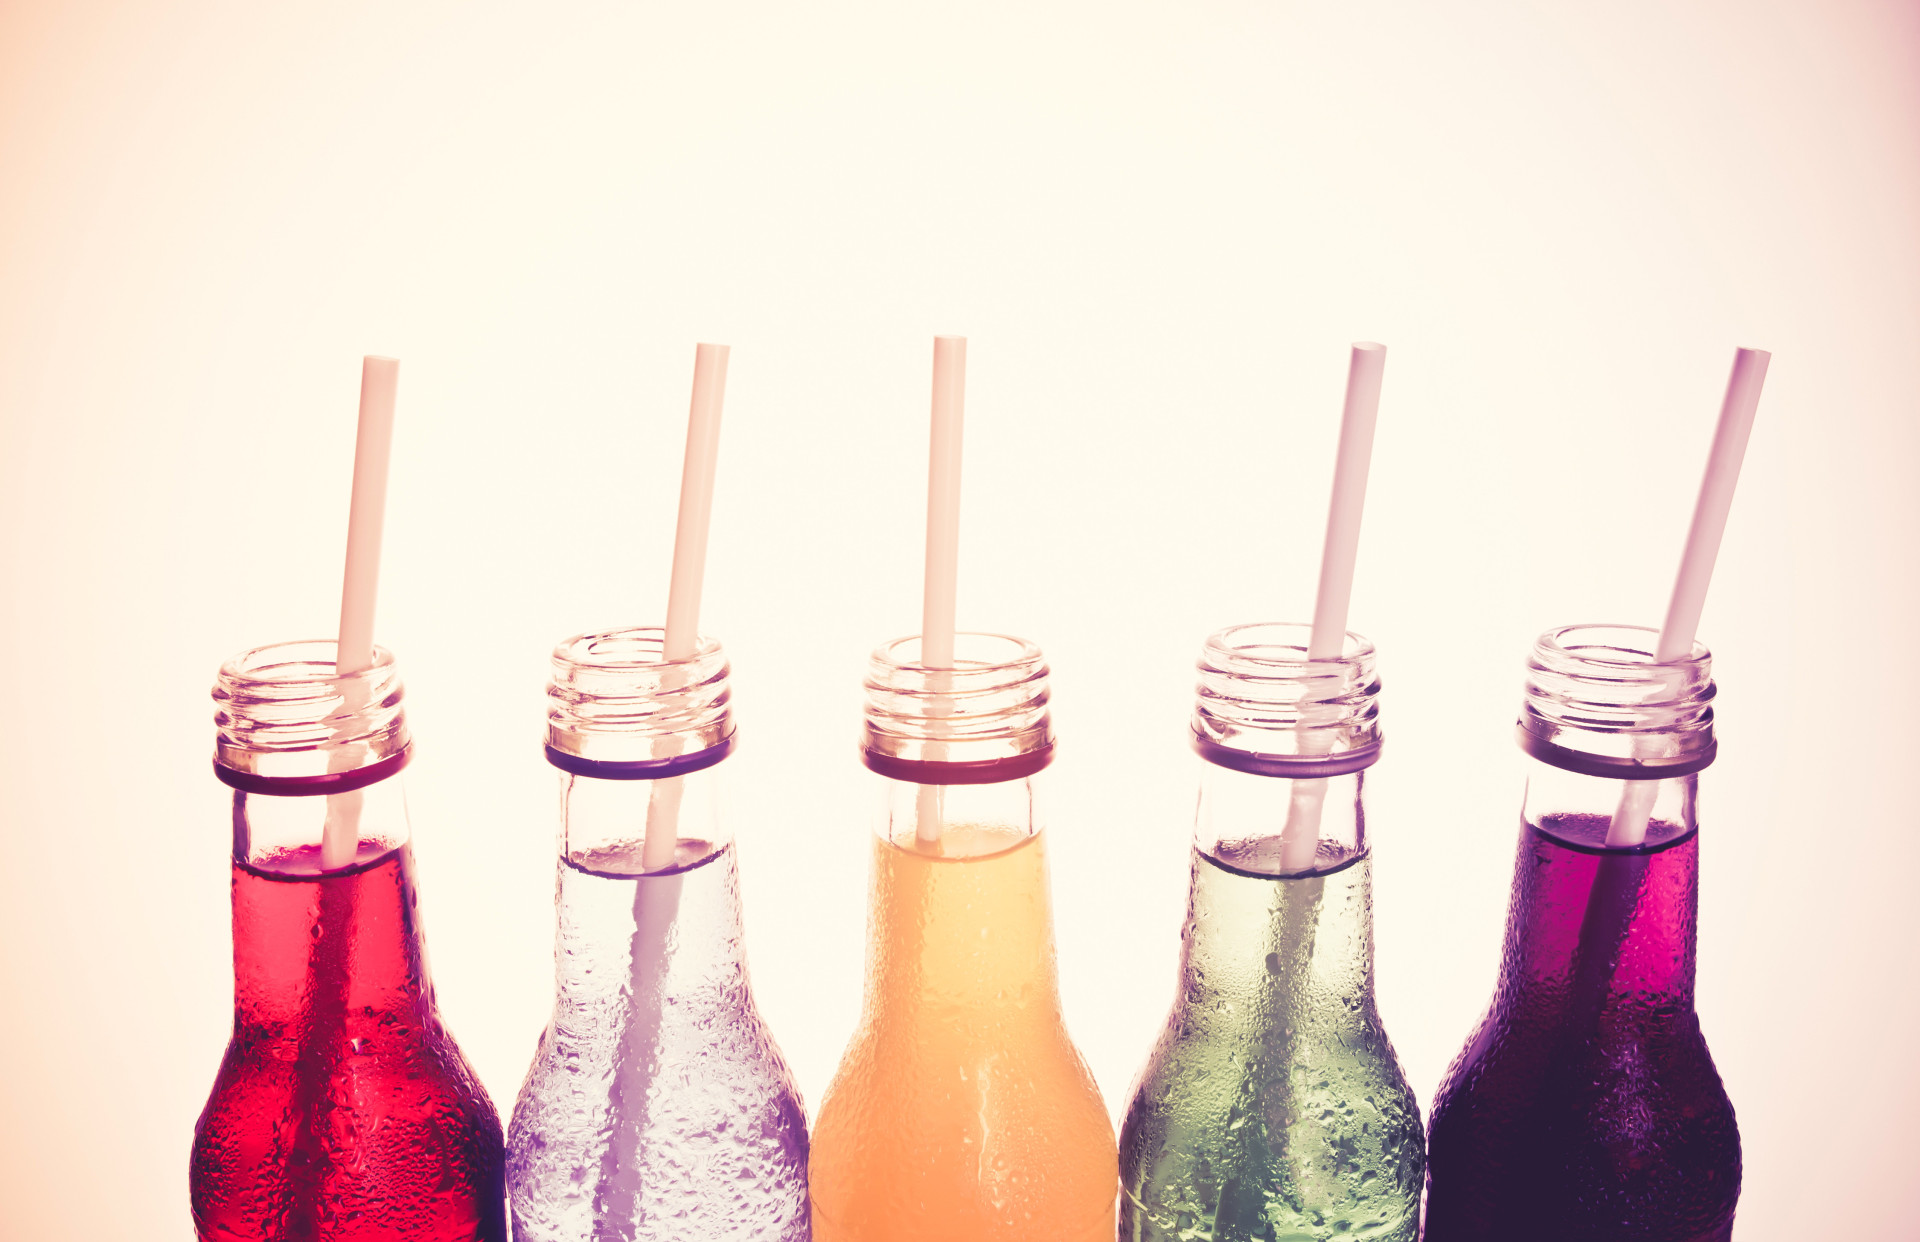 In 2016, the WHO appealed to governments around the world to tax drinks with high sugar content as a way of combating obesity and other problems.<p><a href="https://www.msn.com/en-us/community/channel/vid-7xx8mnucu55yw63we9va2gwr7uihbxwc68fxqp25x6tg4ftibpra?cvid=94631541bc0f4f89bfd59158d696ad7e">Follow us and access great exclusive content every day</a></p>